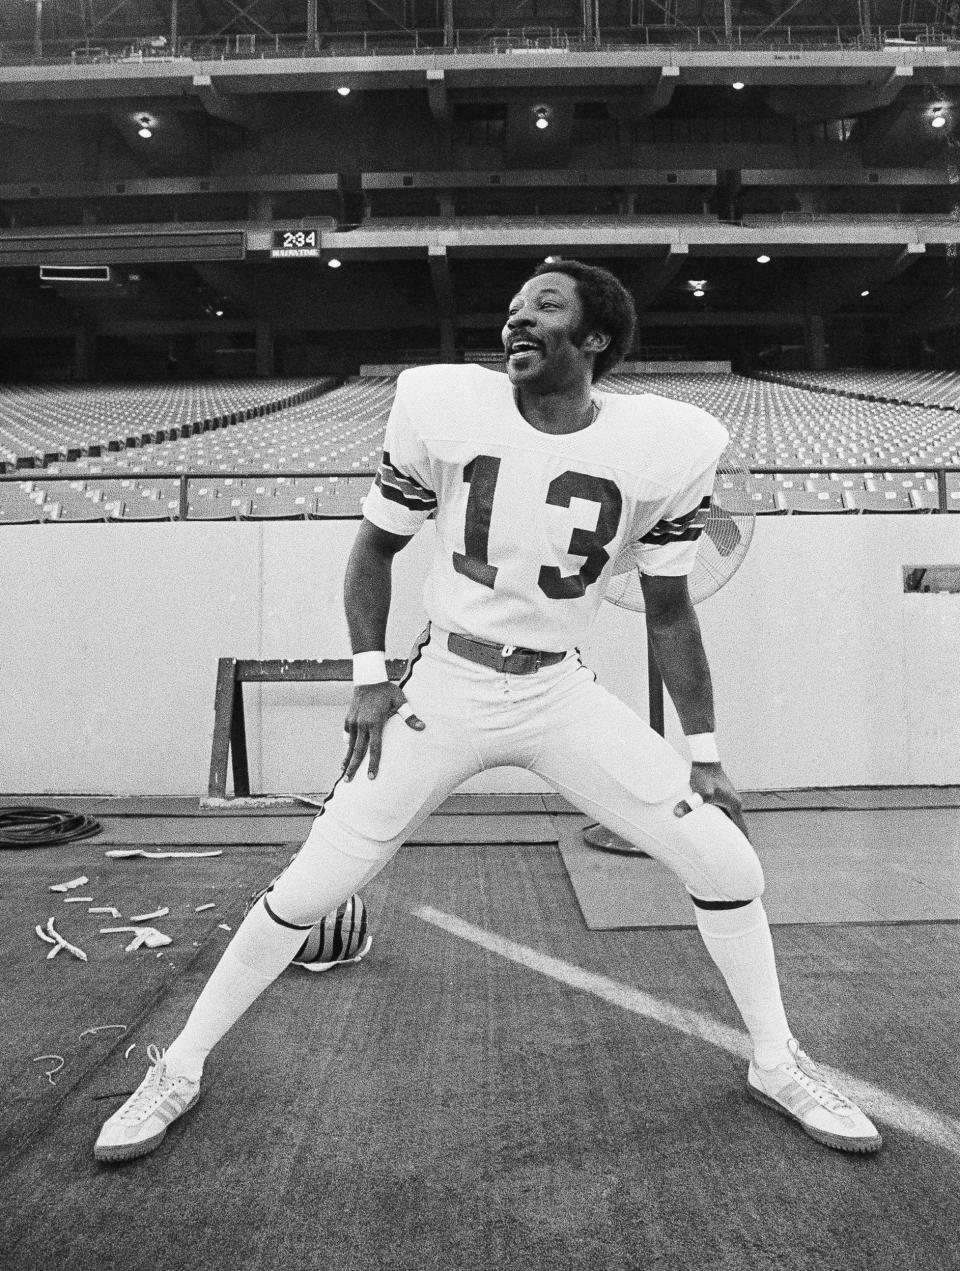 FILE - Cincinnati Bengals cornerback Ken Riley loosens up in Pontiac, Mich., Jan. 21, 1982, as the team begins their daily workout in preparation for NFL football Super Bowl 16 against the San Francisco 49ers. Riley is among those who were voted into the Pro Football Hall of Fame, it was announced Thursday, Feb. 9, 2023. (AP Photo, File)